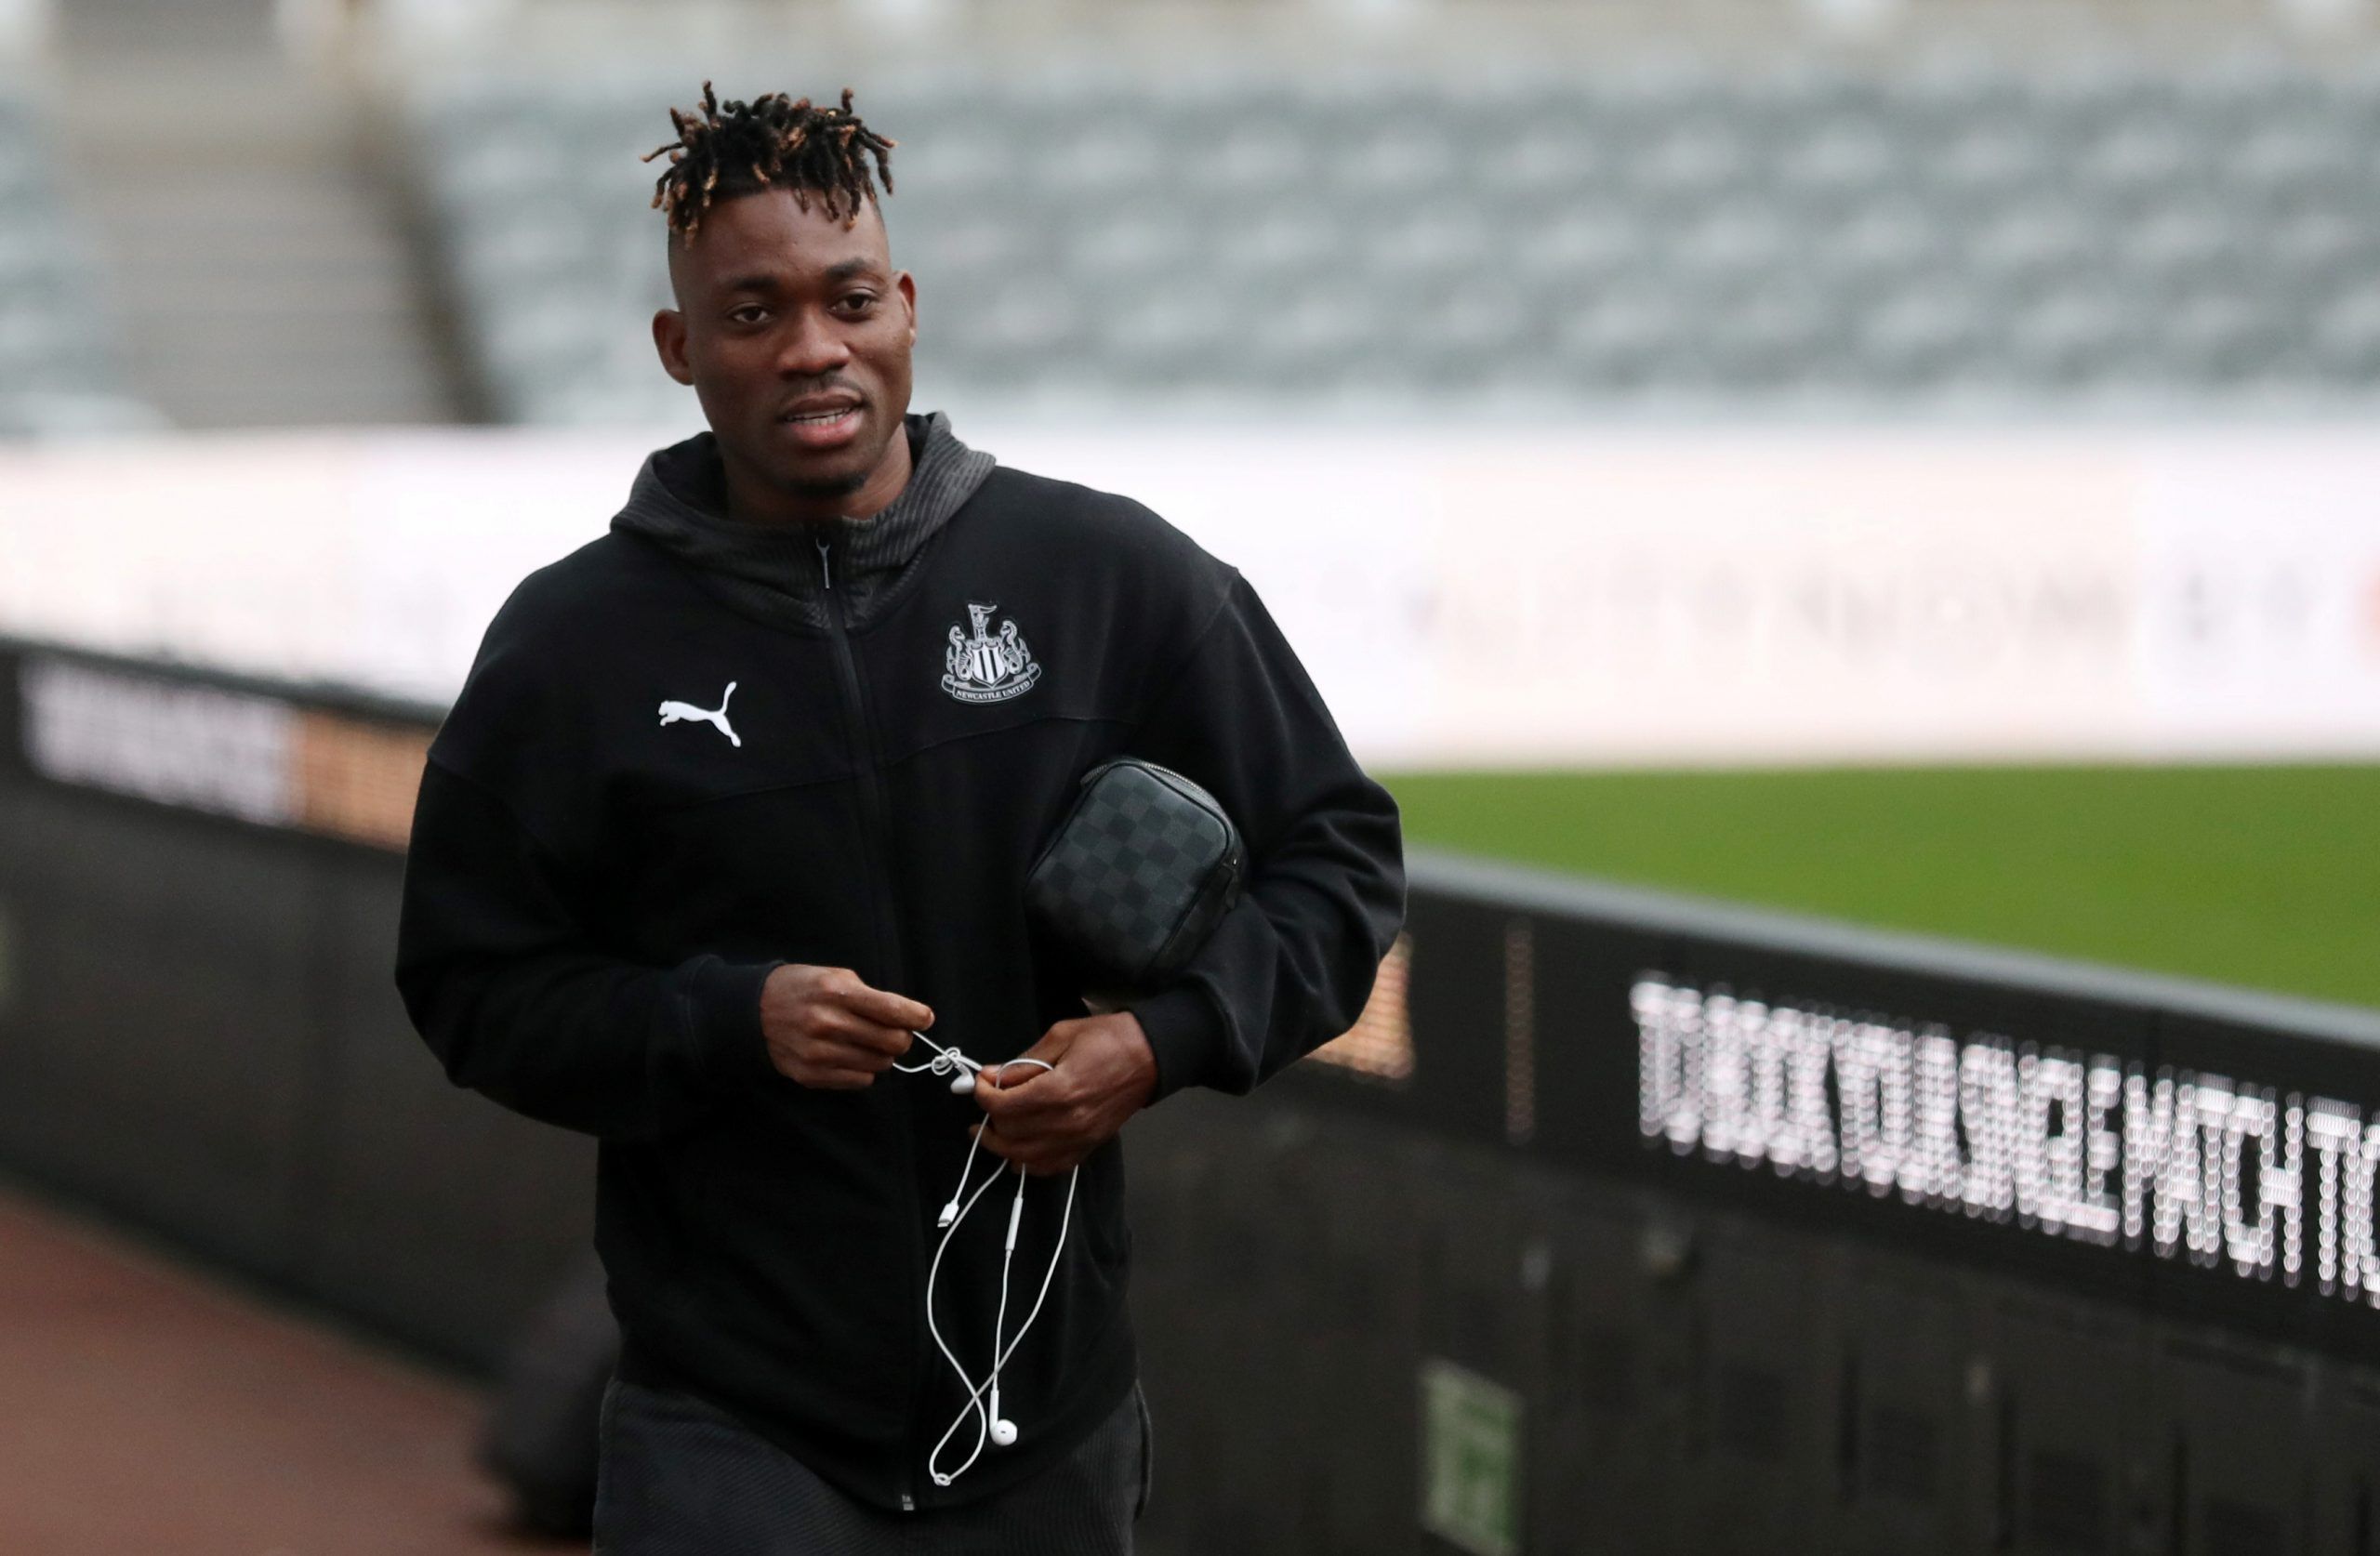 Soccer Football - Premier League - Newcastle United v Crystal Palace - St James' Park, Newcastle, Britain - December 21, 2019  Newcastle United's Christian Atsu arrives before the match   REUTERS/Scott Heppell  EDITORIAL USE ONLY. No use with unauthorized audio, video, data, fixture lists, club/league logos or 